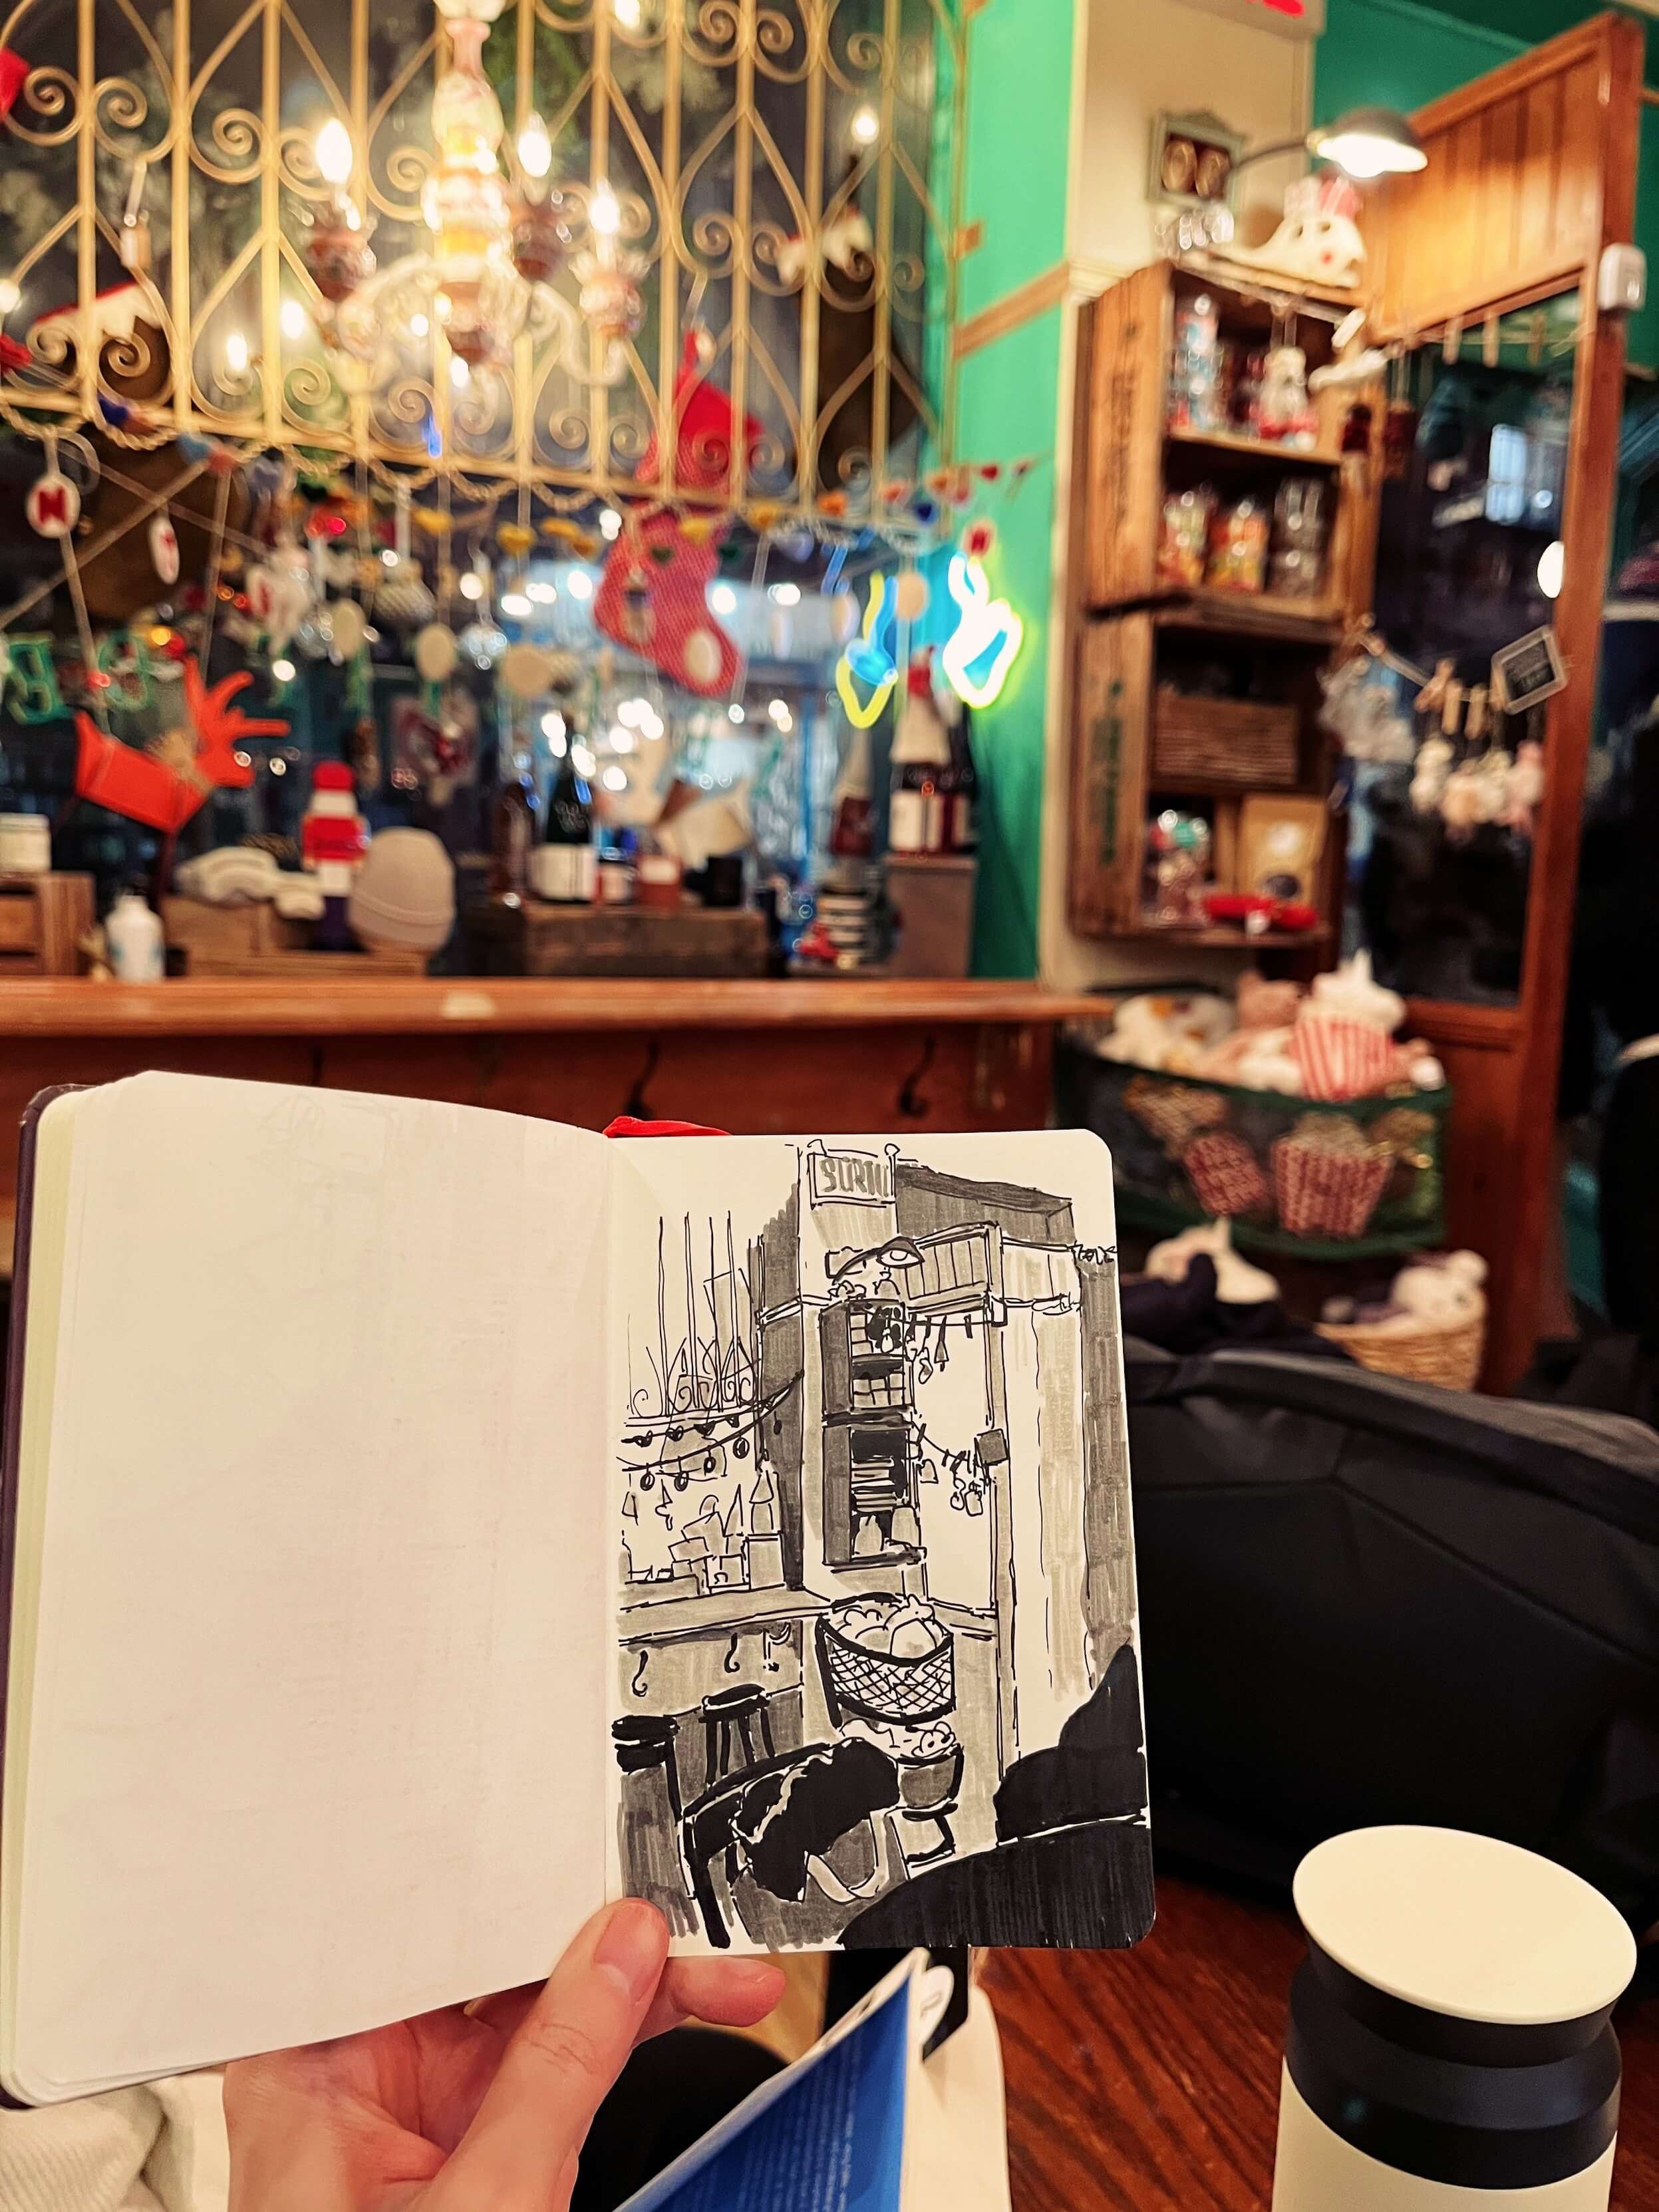 Holding up a sketchbook drawing of a cafe window. The window has a bunch of holiday decorations. Next to it are some shelves with jars and souvenirs.